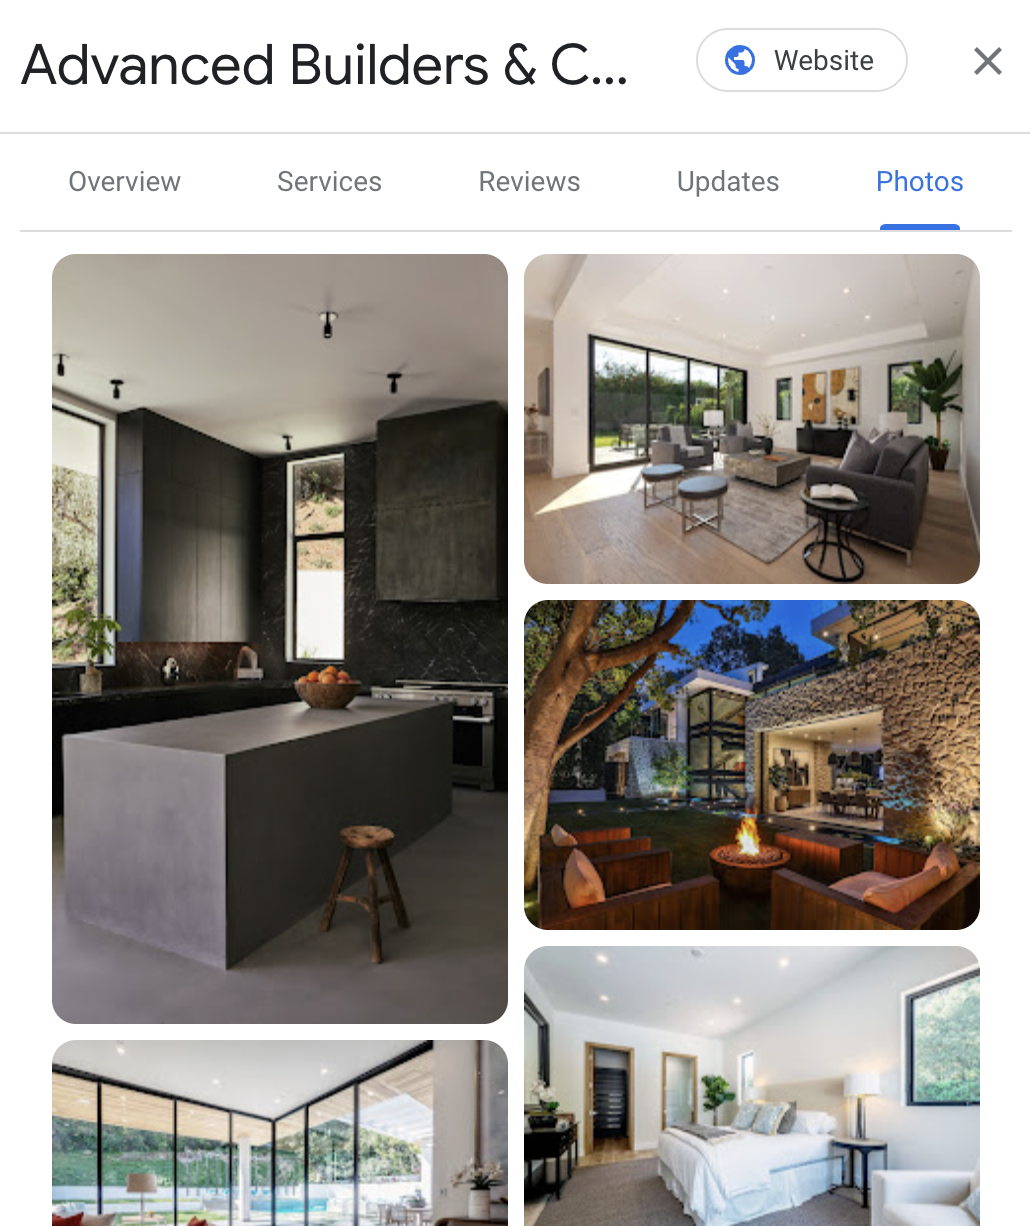 Advanced Builders & Contractor's Google Business Profile photo collection